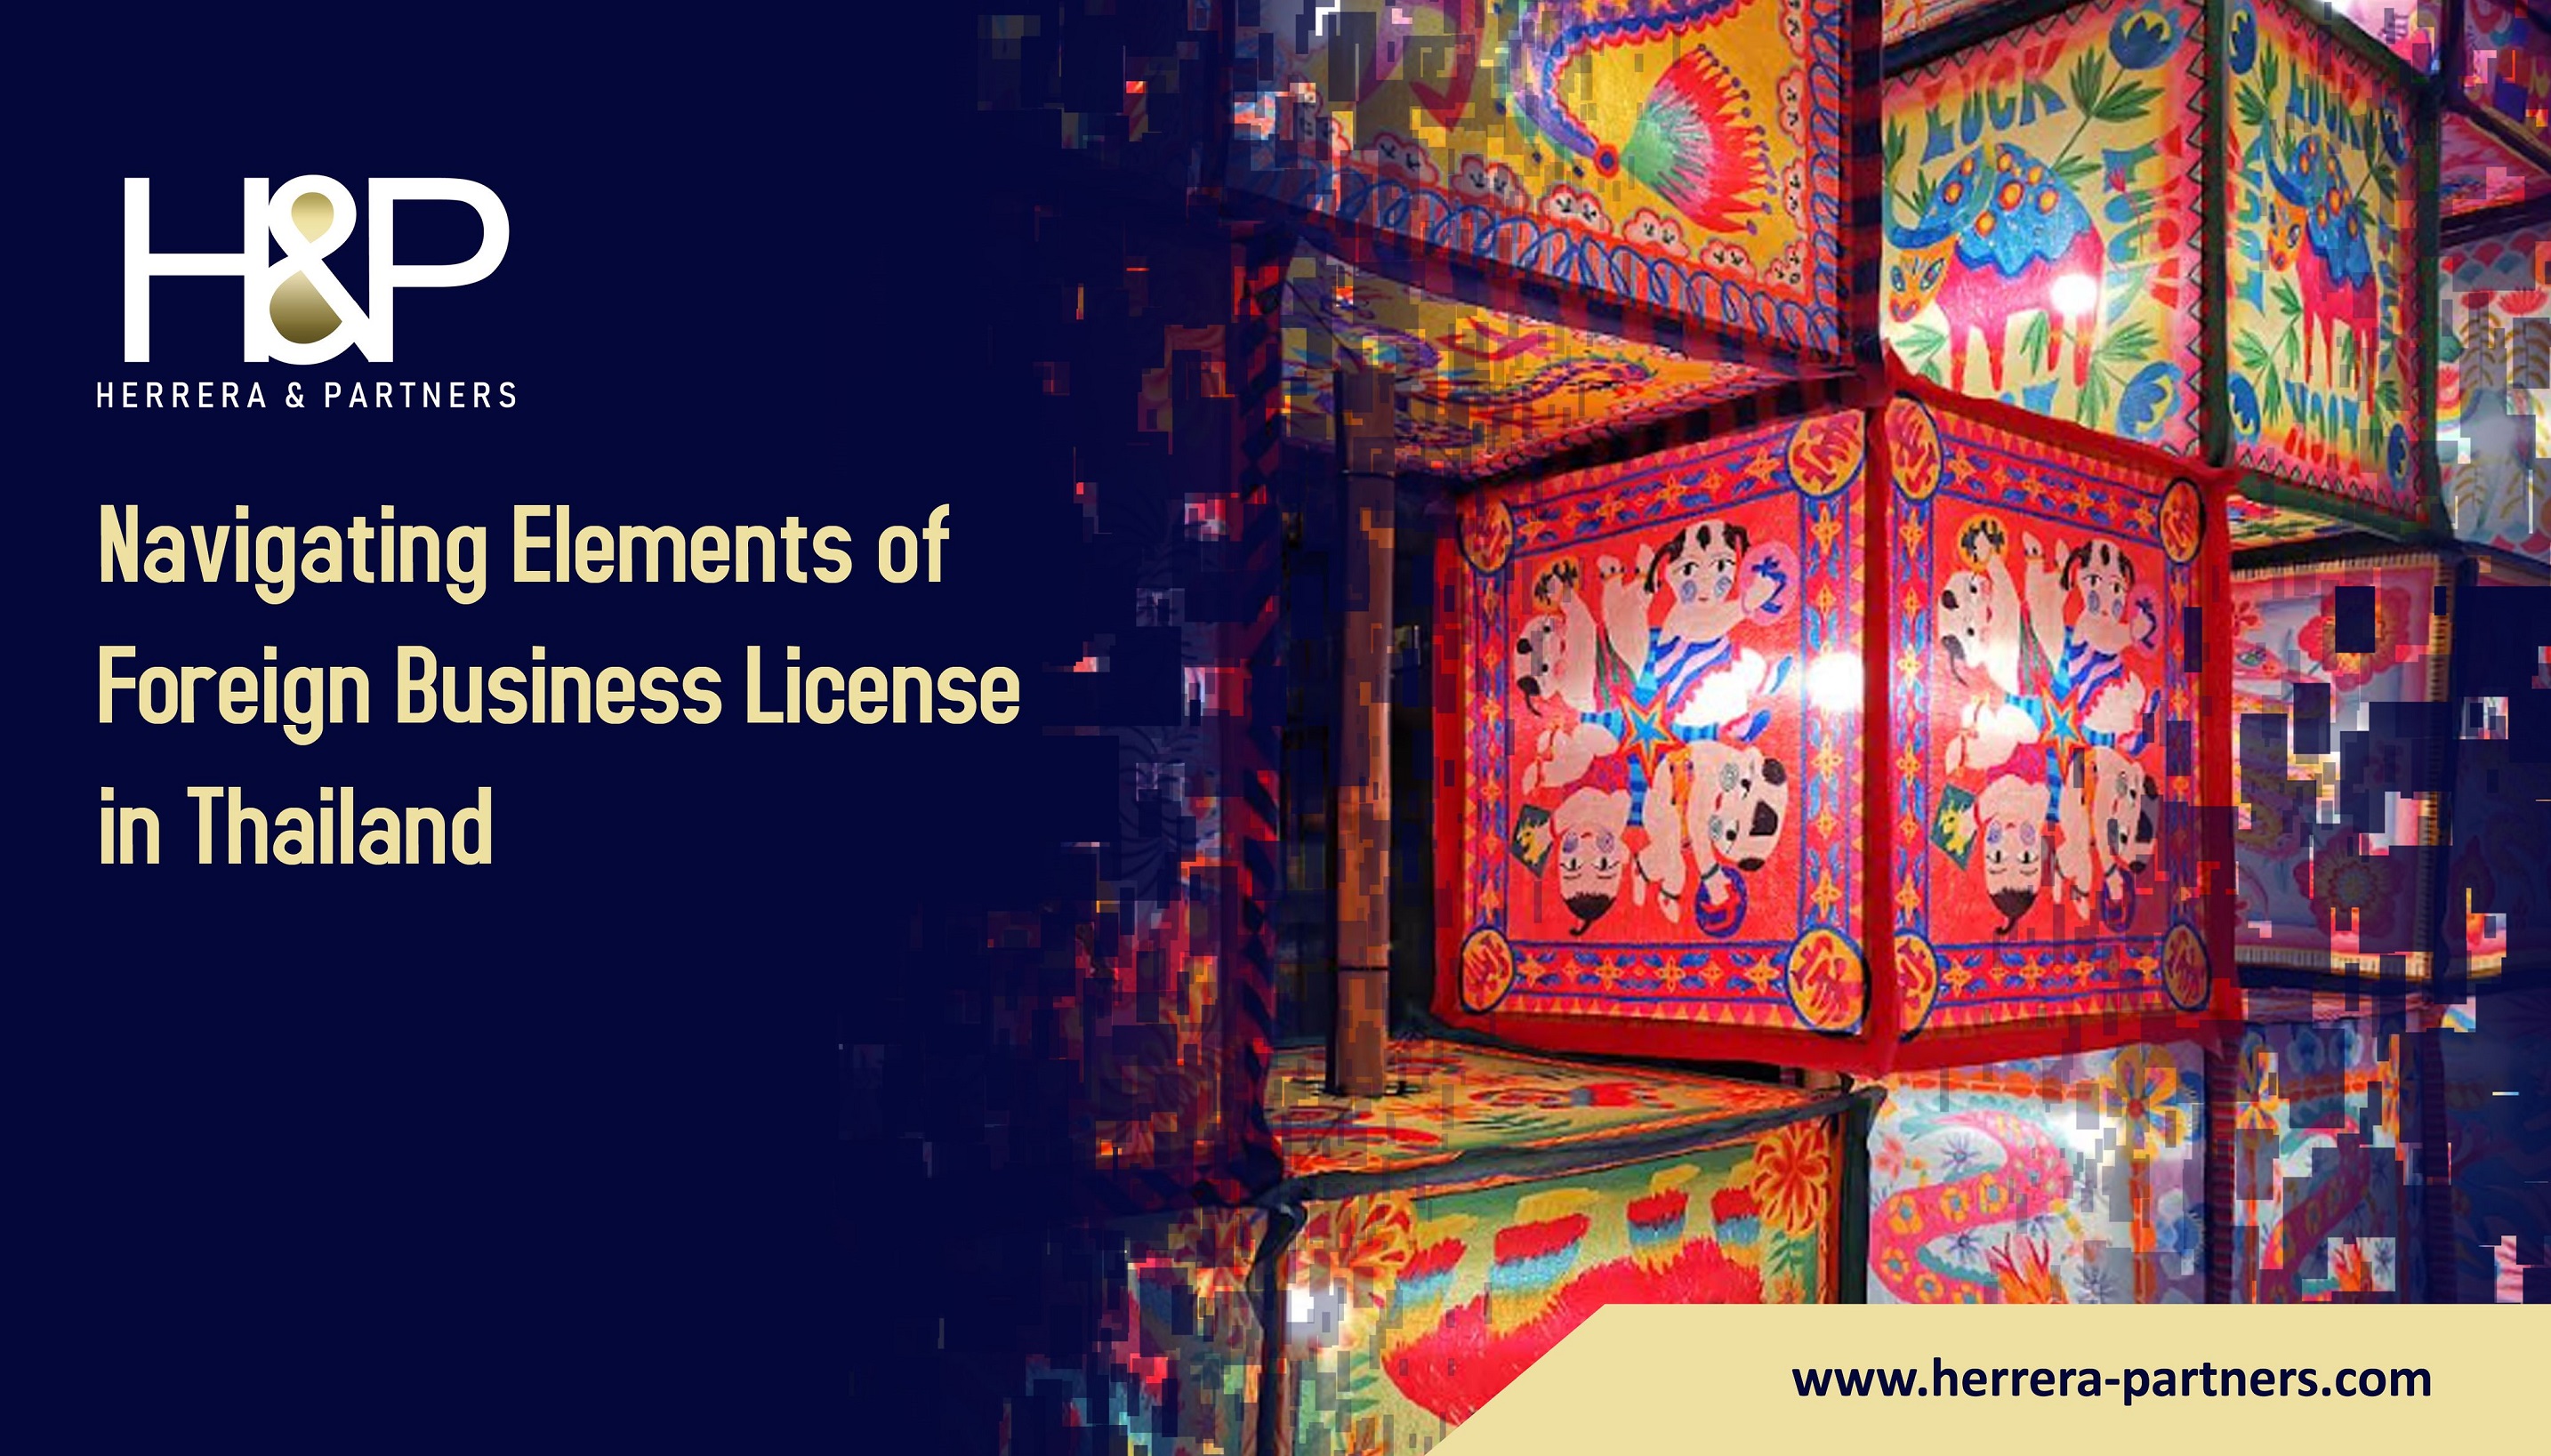 Navigating Elements of Foreign Business License in Thailand FBL in Thailand H&P Bangkok leading law firm for corporate services